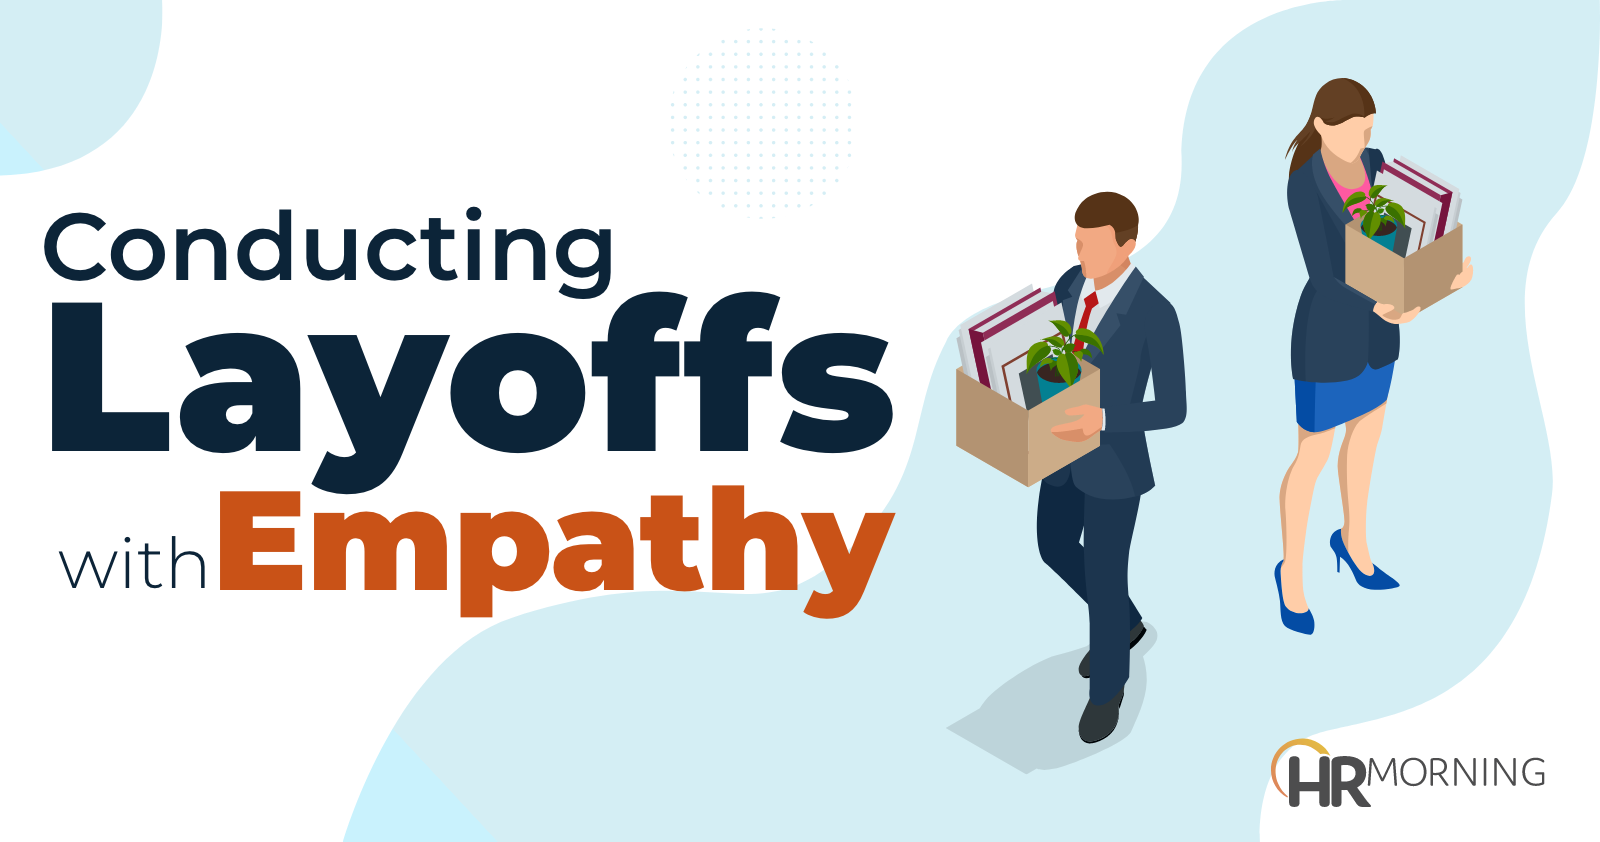 Conducting layoffs with Empathy